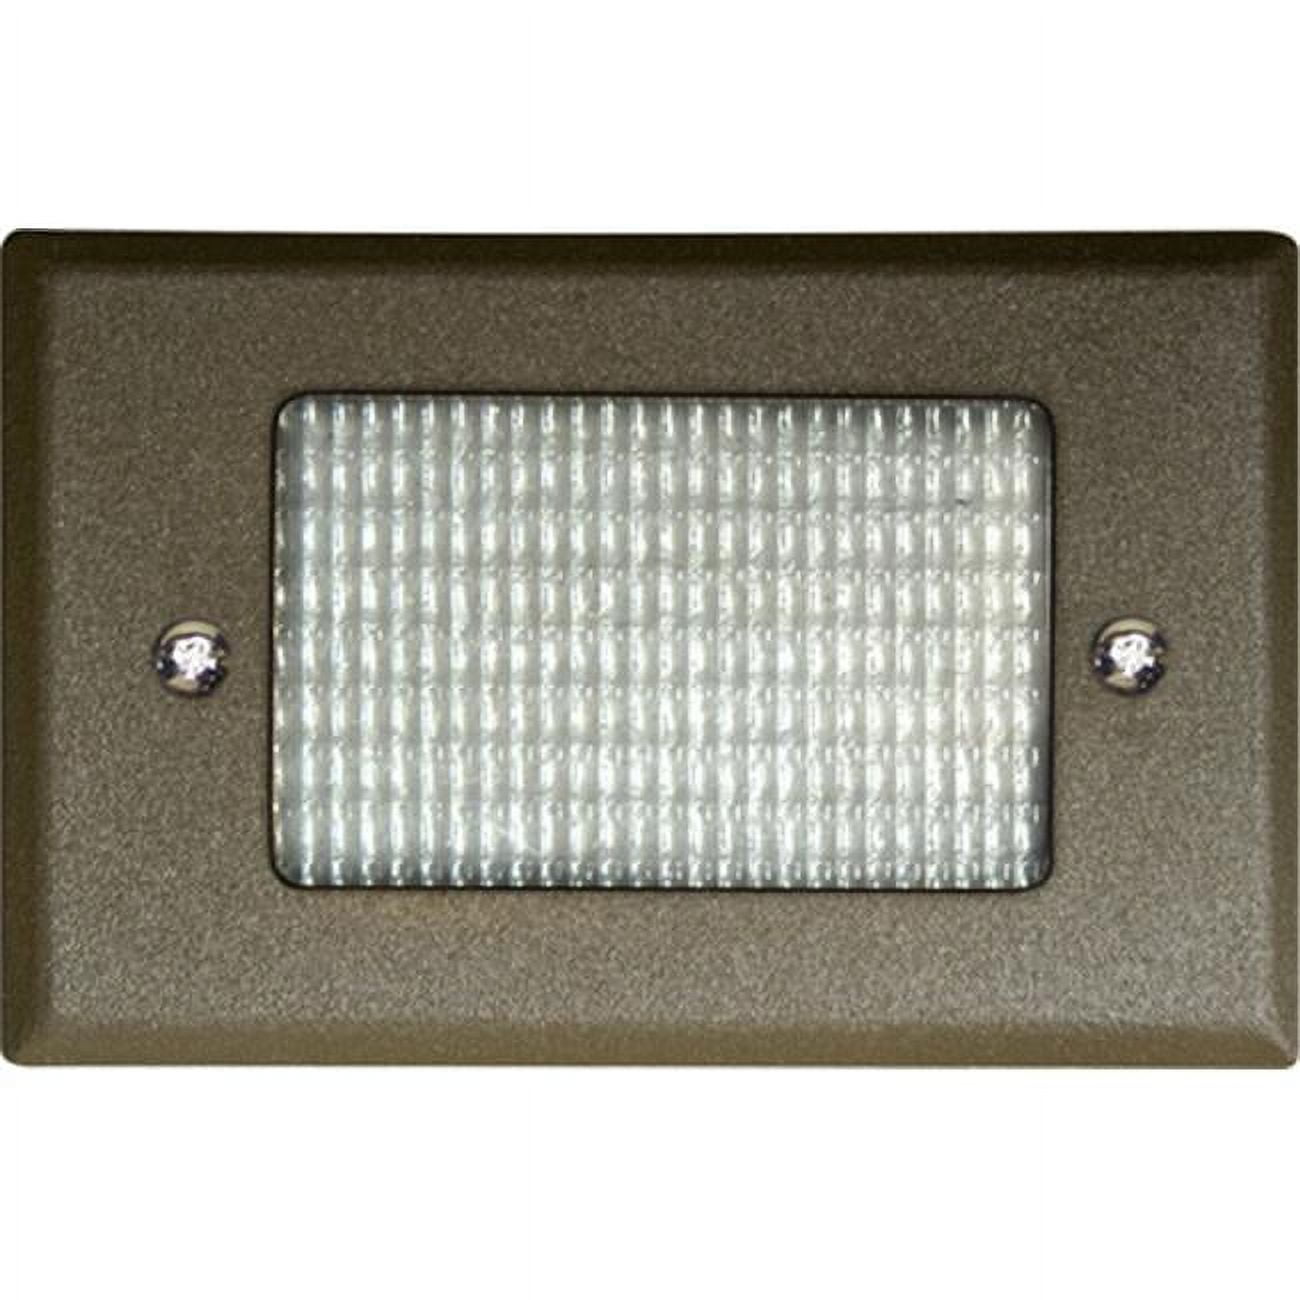 Picture of Dabmar Lighting LV618-BZ Cast Aluminum Recessed Open Face Brick, Step & Wall Light, Bronze - 1.95 x 4.83 x 3.10 in.